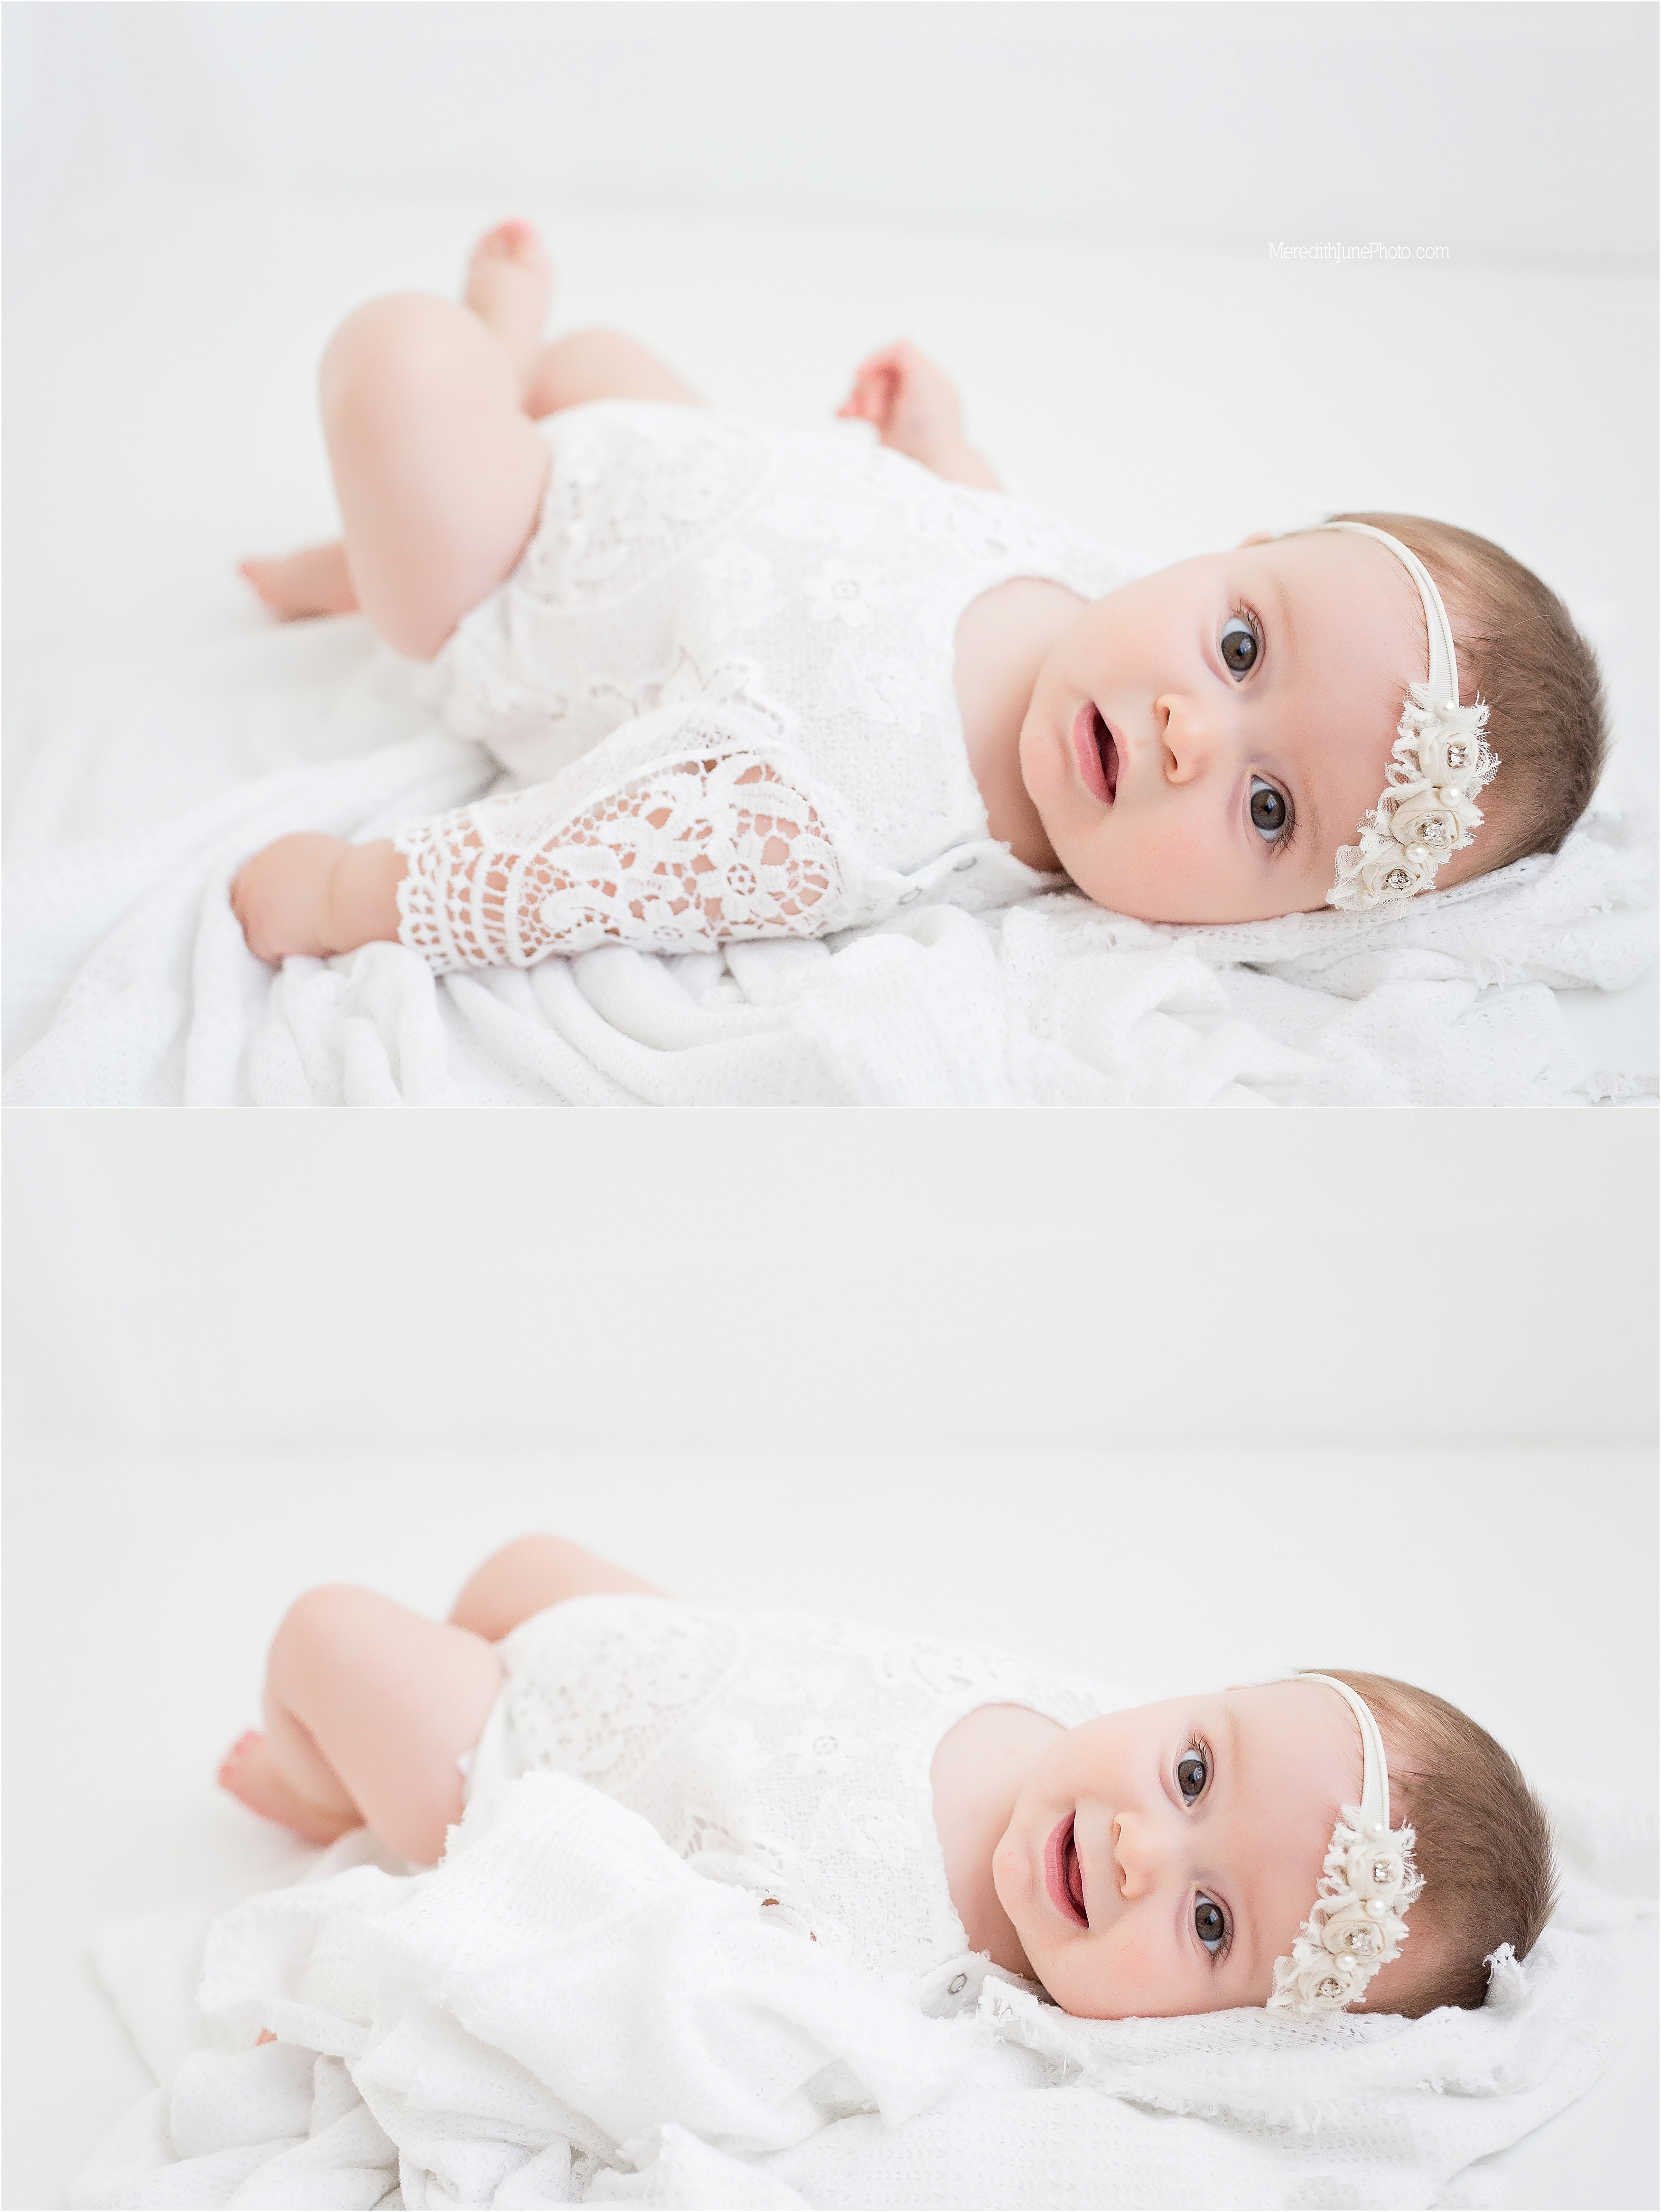 Ryann's bright and airy sitter session at Meredith June Photography